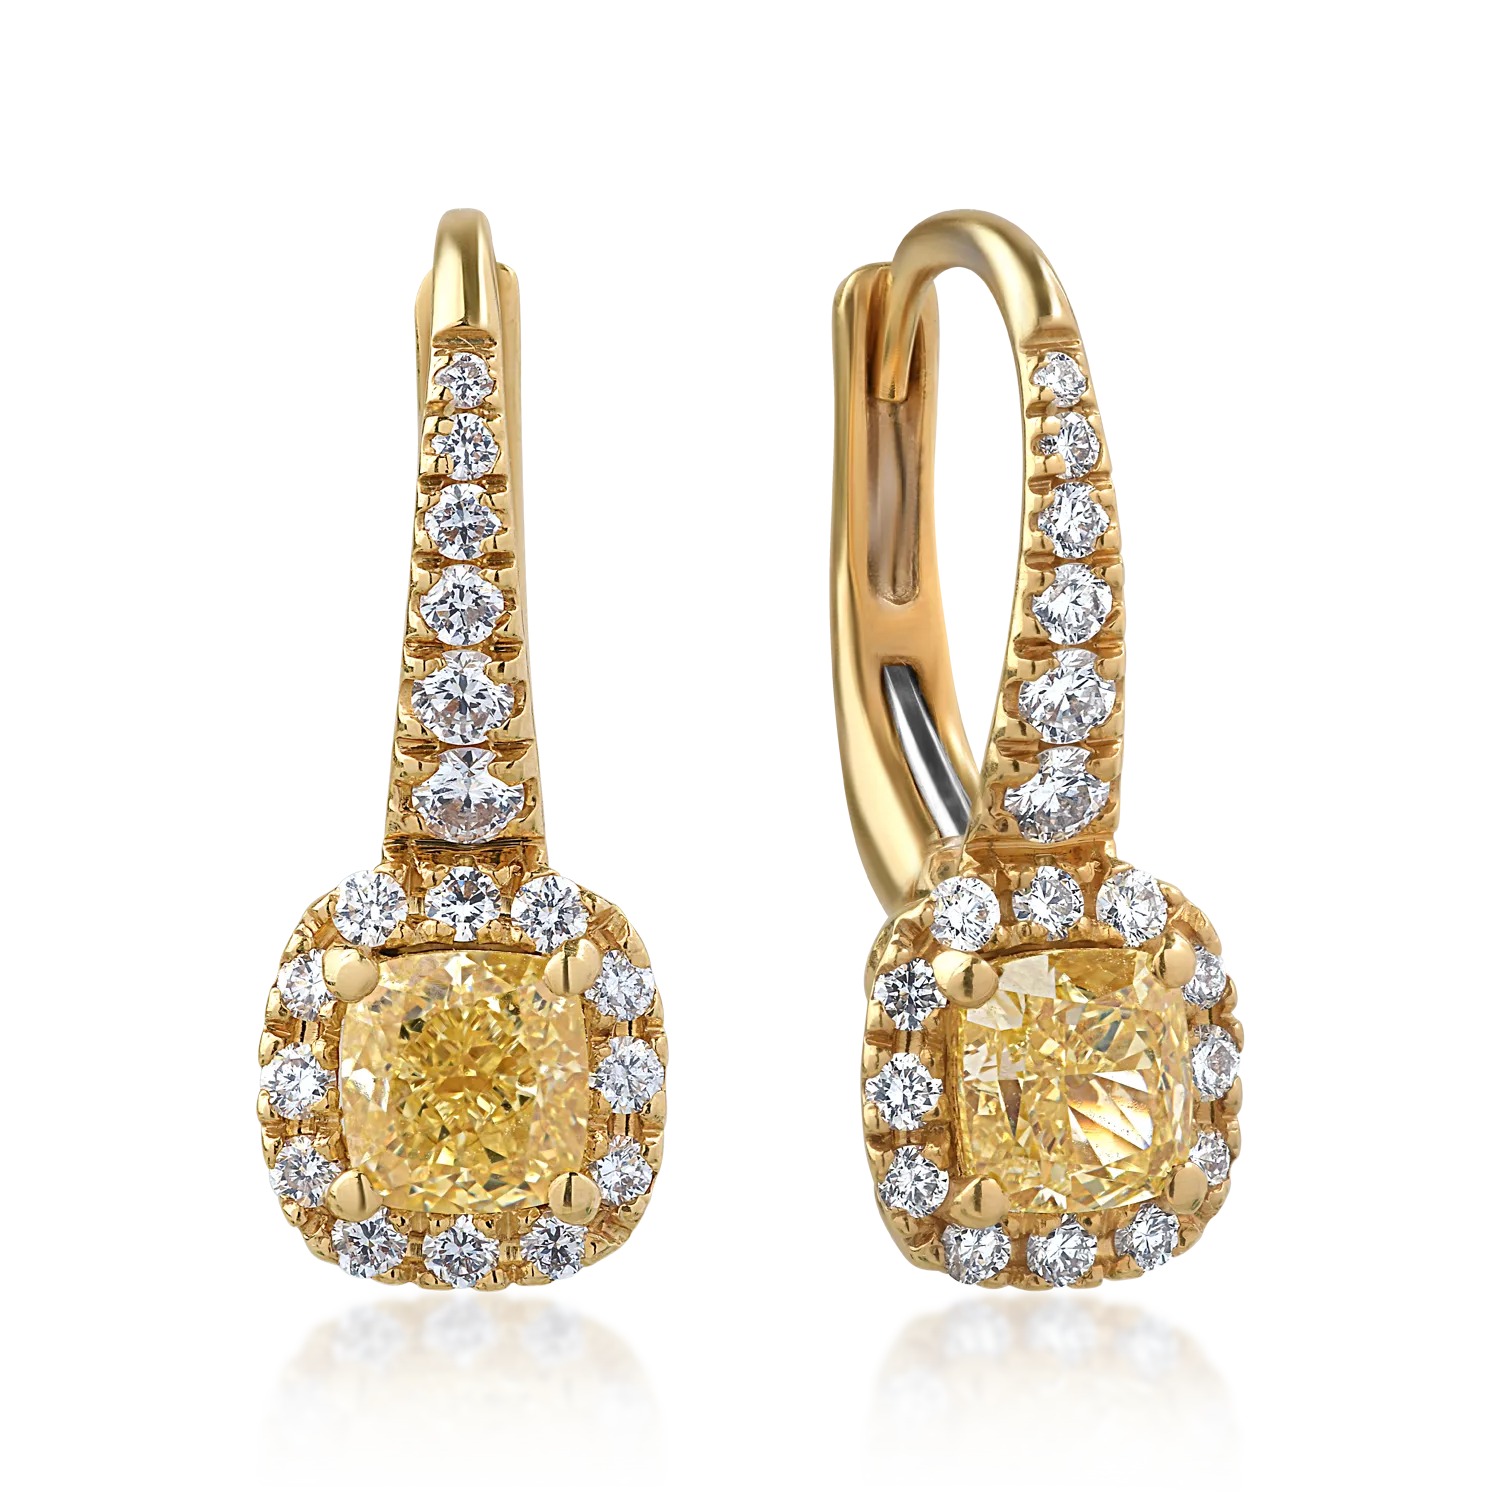 18K yellow gold earrings with 1.21ct fancy-yellow diamonds and 0.52ct clear diamonds